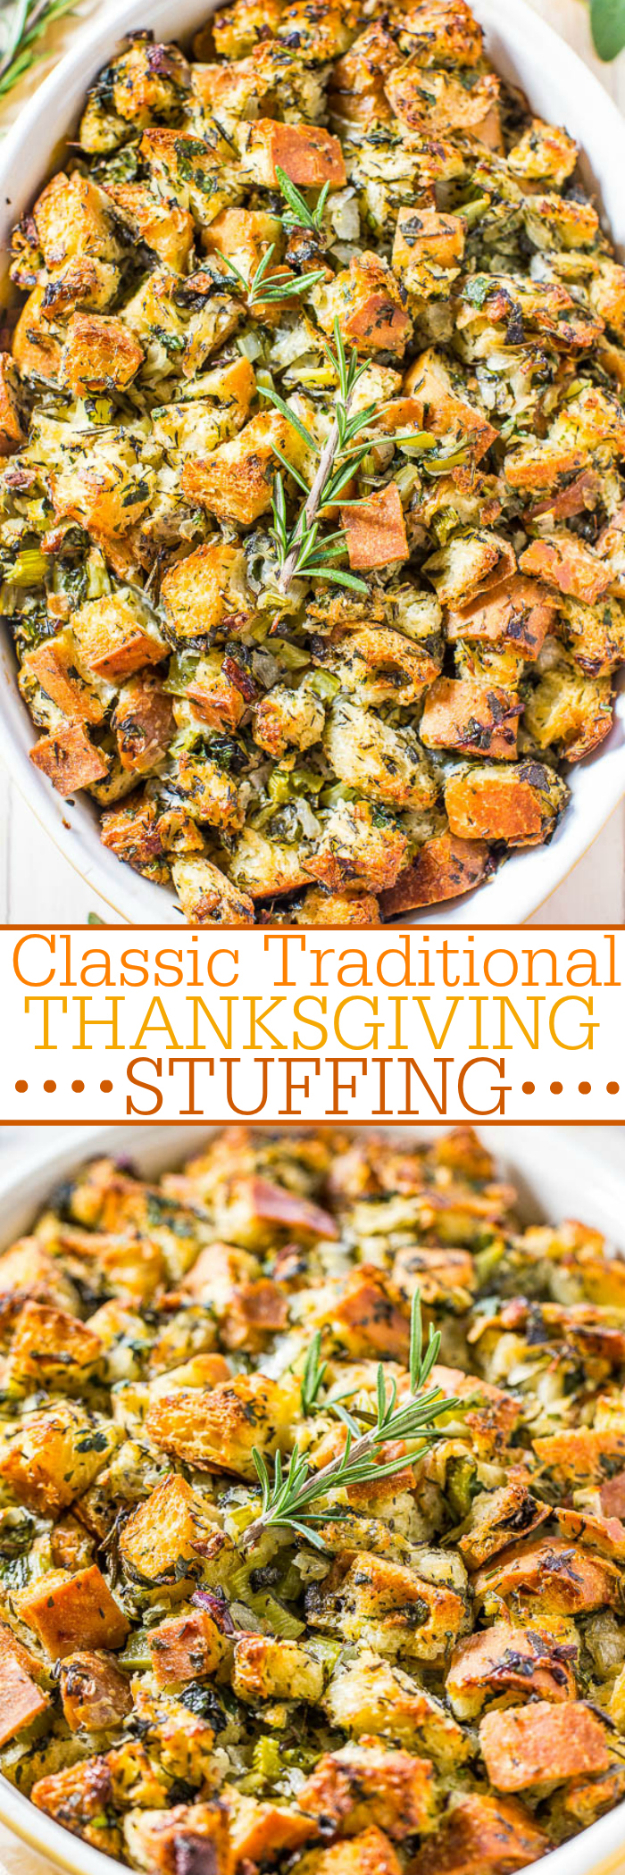 Best Thanksgiving Dinner Recipes - Classic Traditional Thanksgiving Stuffing - Easy DIY Desserts, Sides, Sauces, Main Courses, Vegetables, Pie and Side Dishes. Simple Gravy, Cranberries, Turkey and Pies With Step by Step Tutorials http://diyjoy.com/best-thanksgiving-dinner-recipes